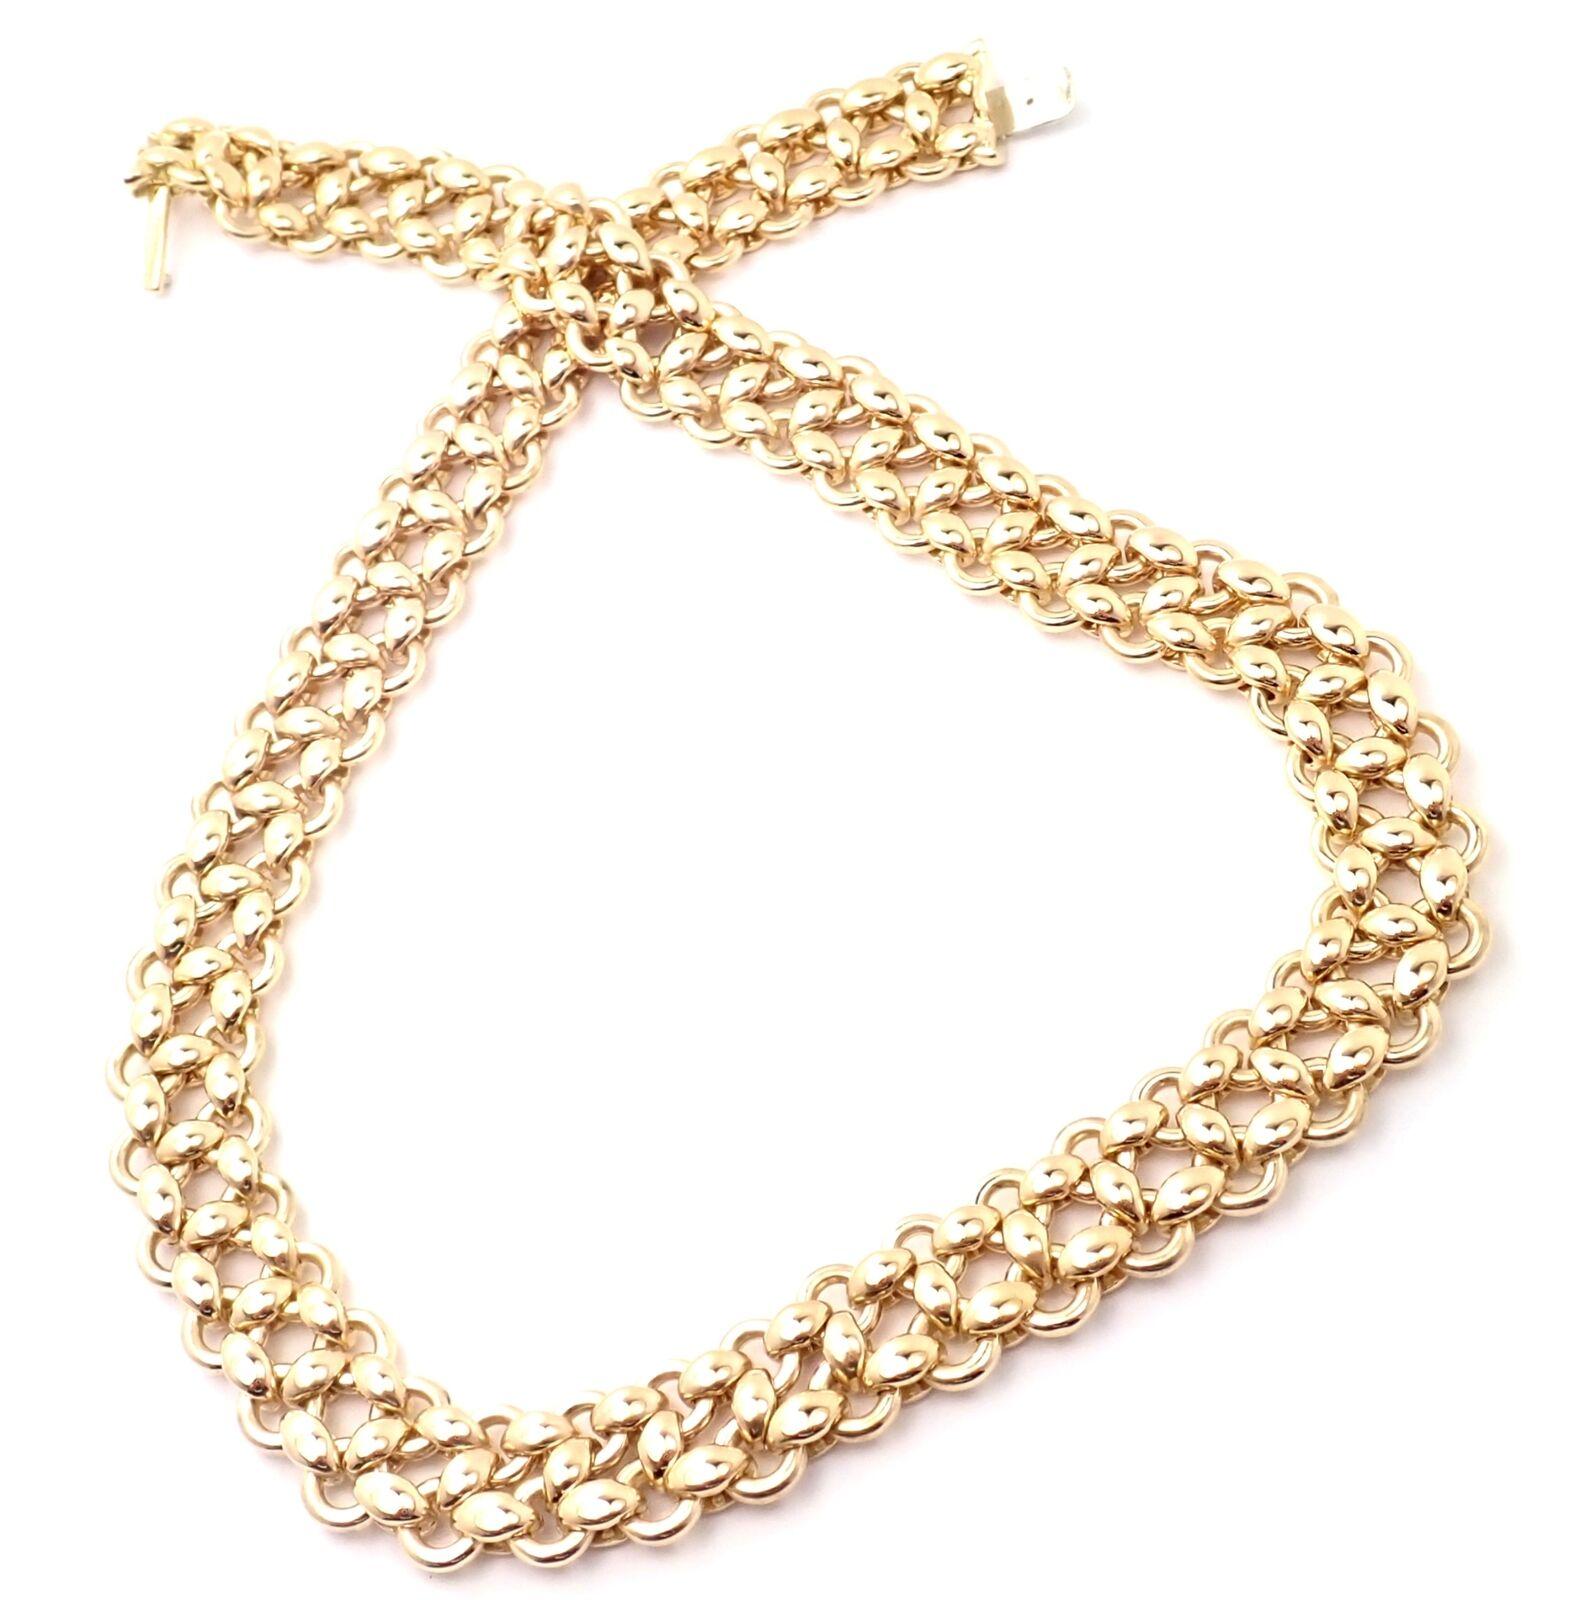 Vintage Hermes Yellow Gold Link Necklace In Excellent Condition For Sale In Holland, PA